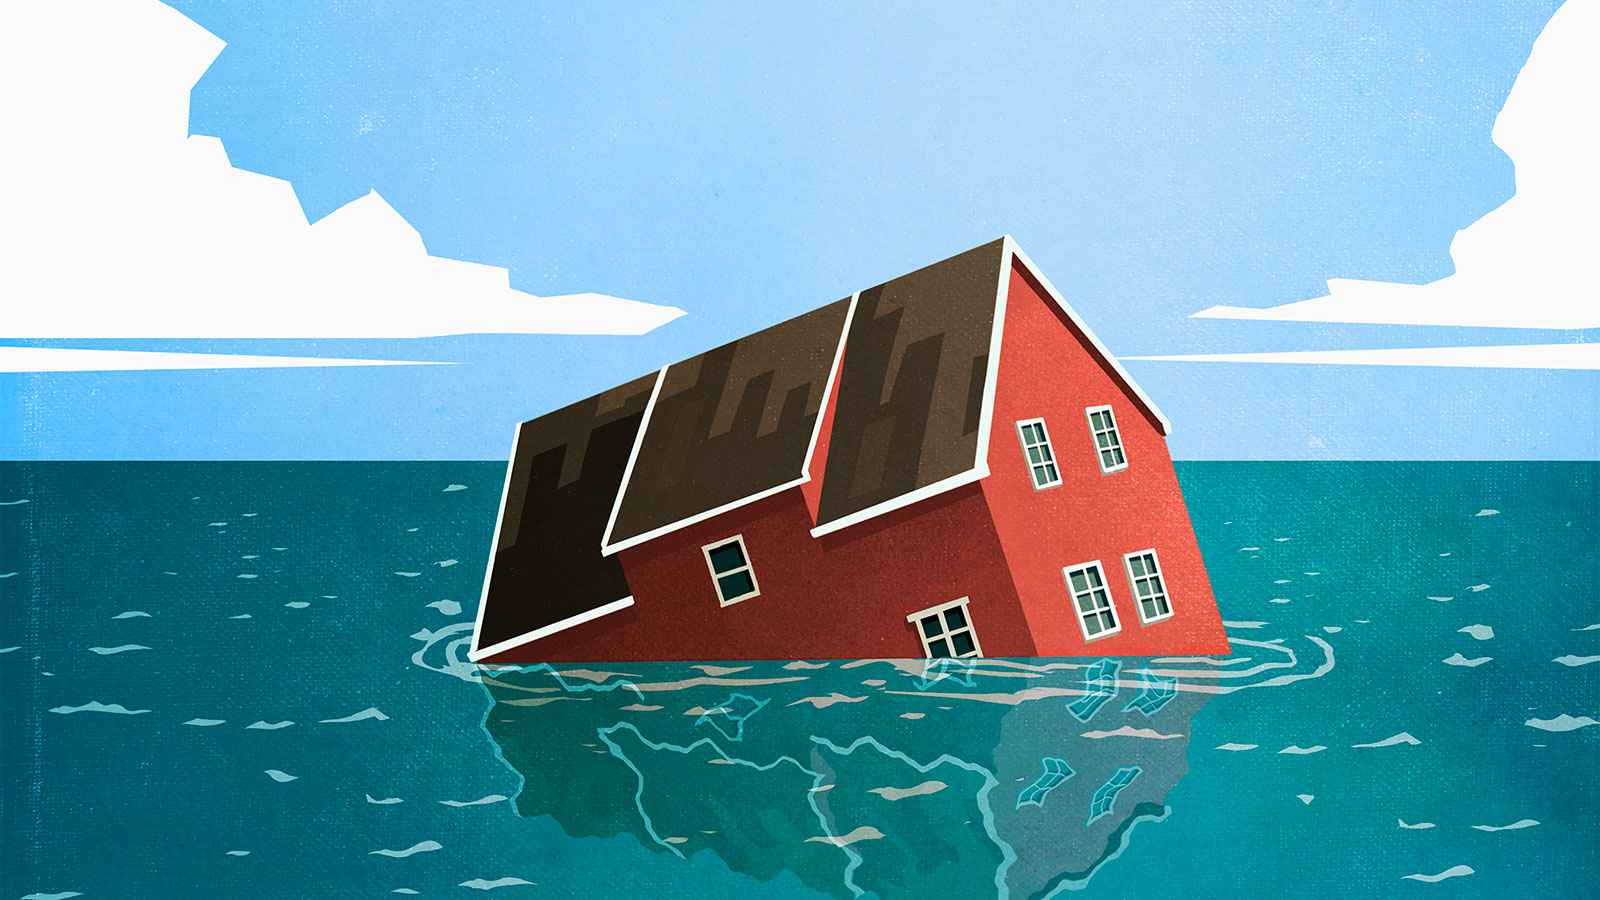 Flood Insurance: What Homeowners Need to Know - Money